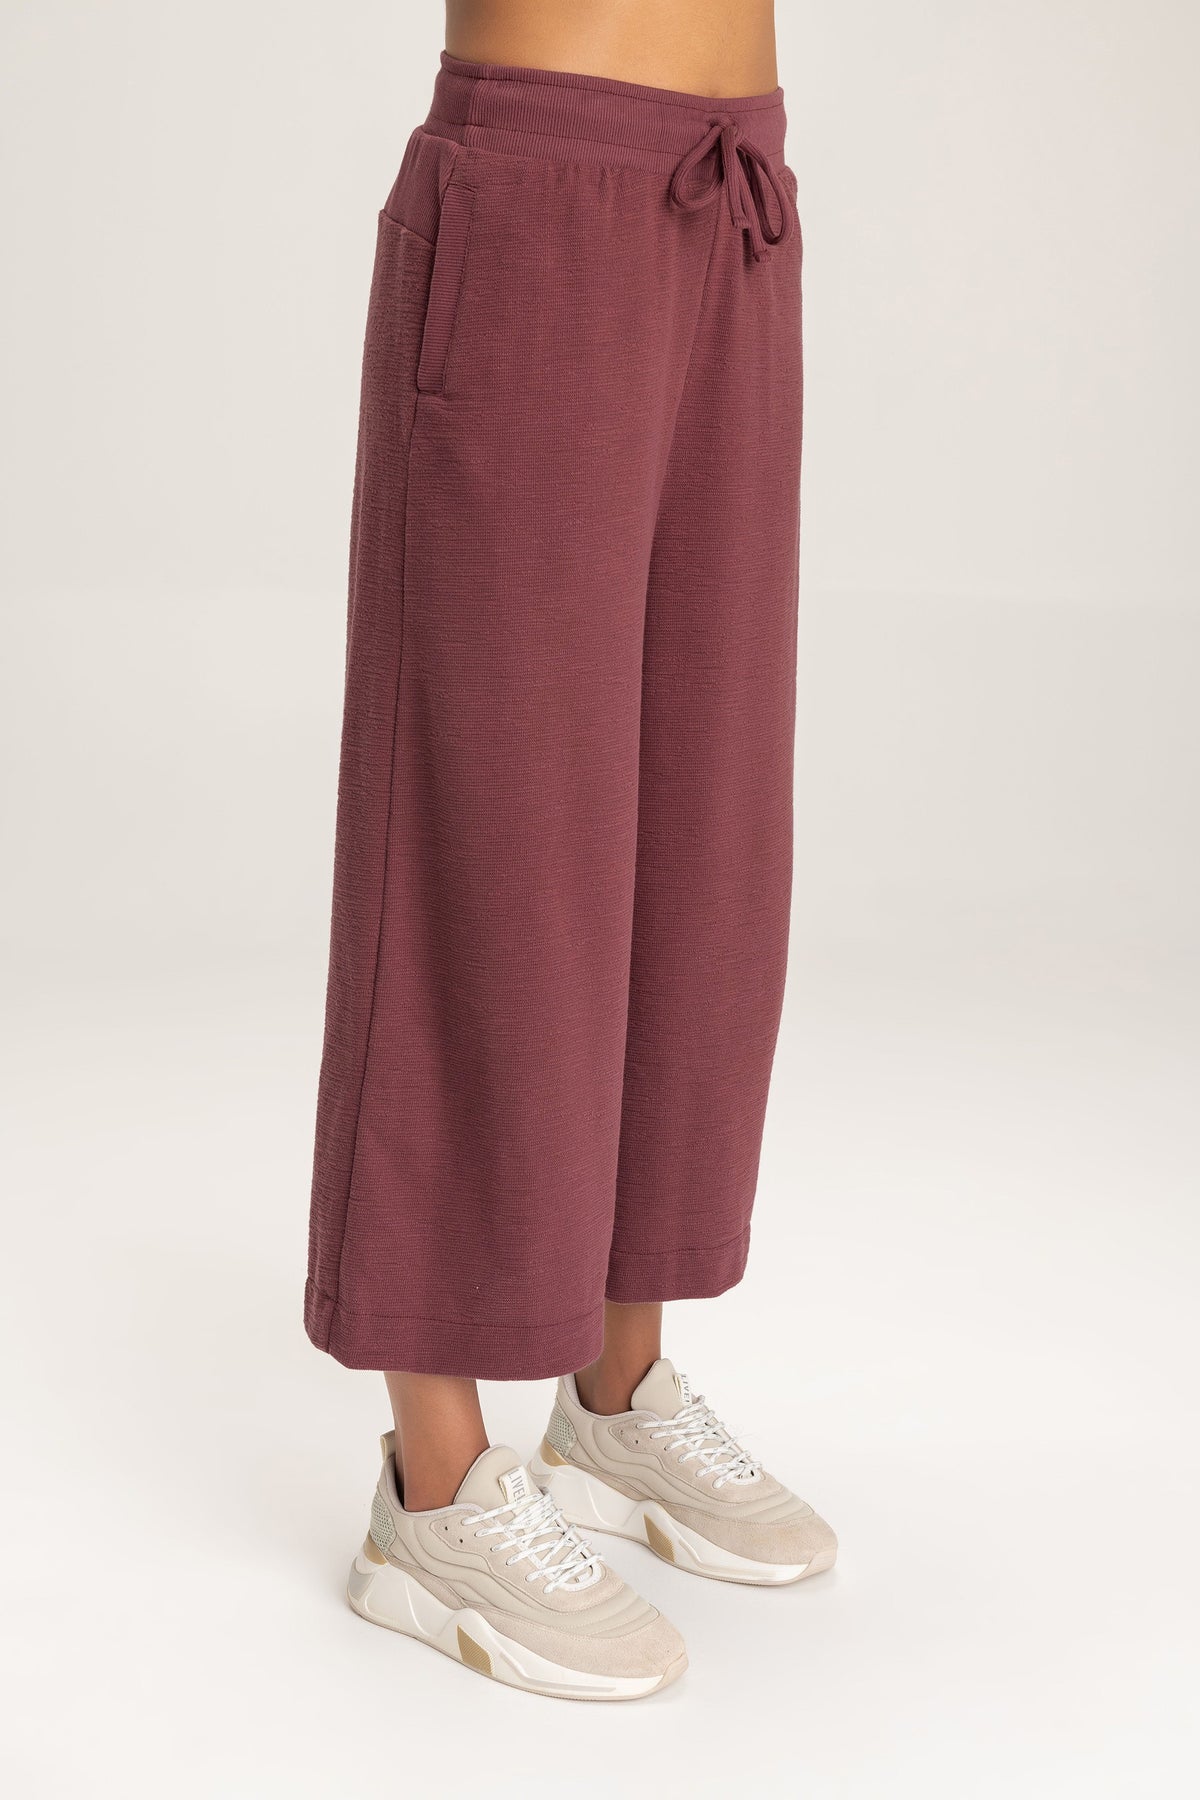 Pixie Cropped Pants